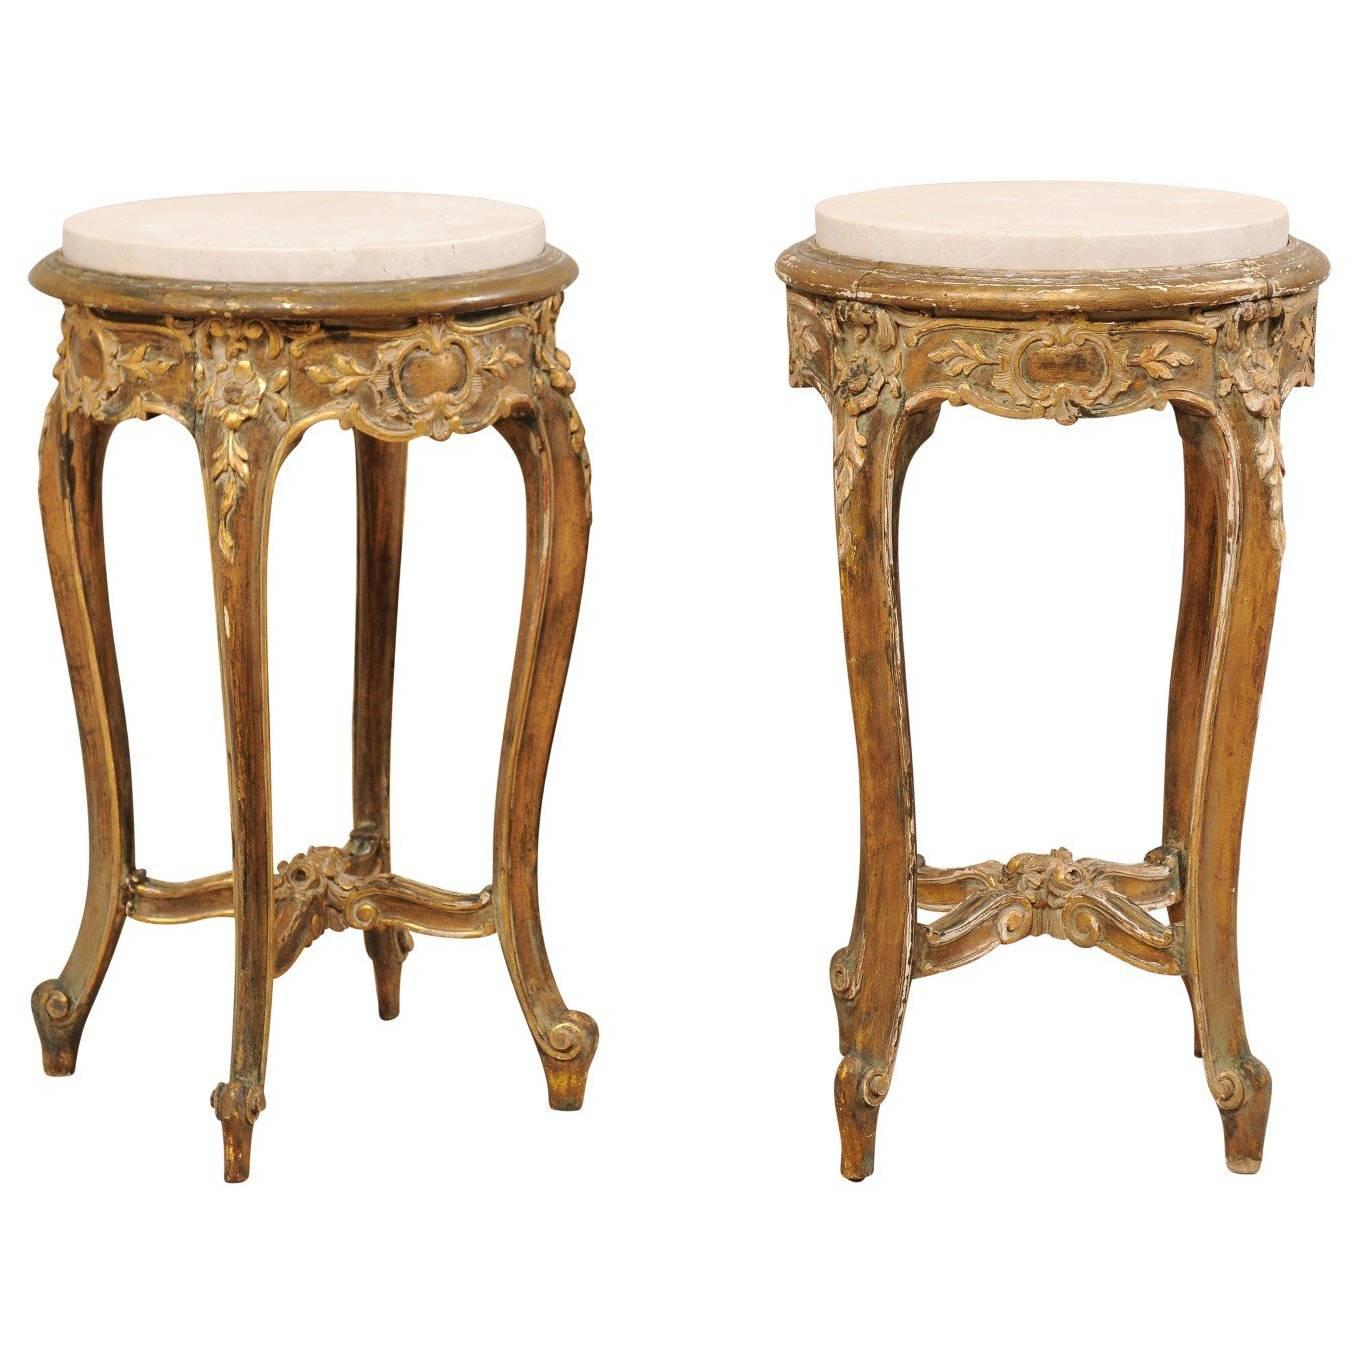 Pair of French Midcentury Carved Giltwood Round Marble-Top Occasional Tables